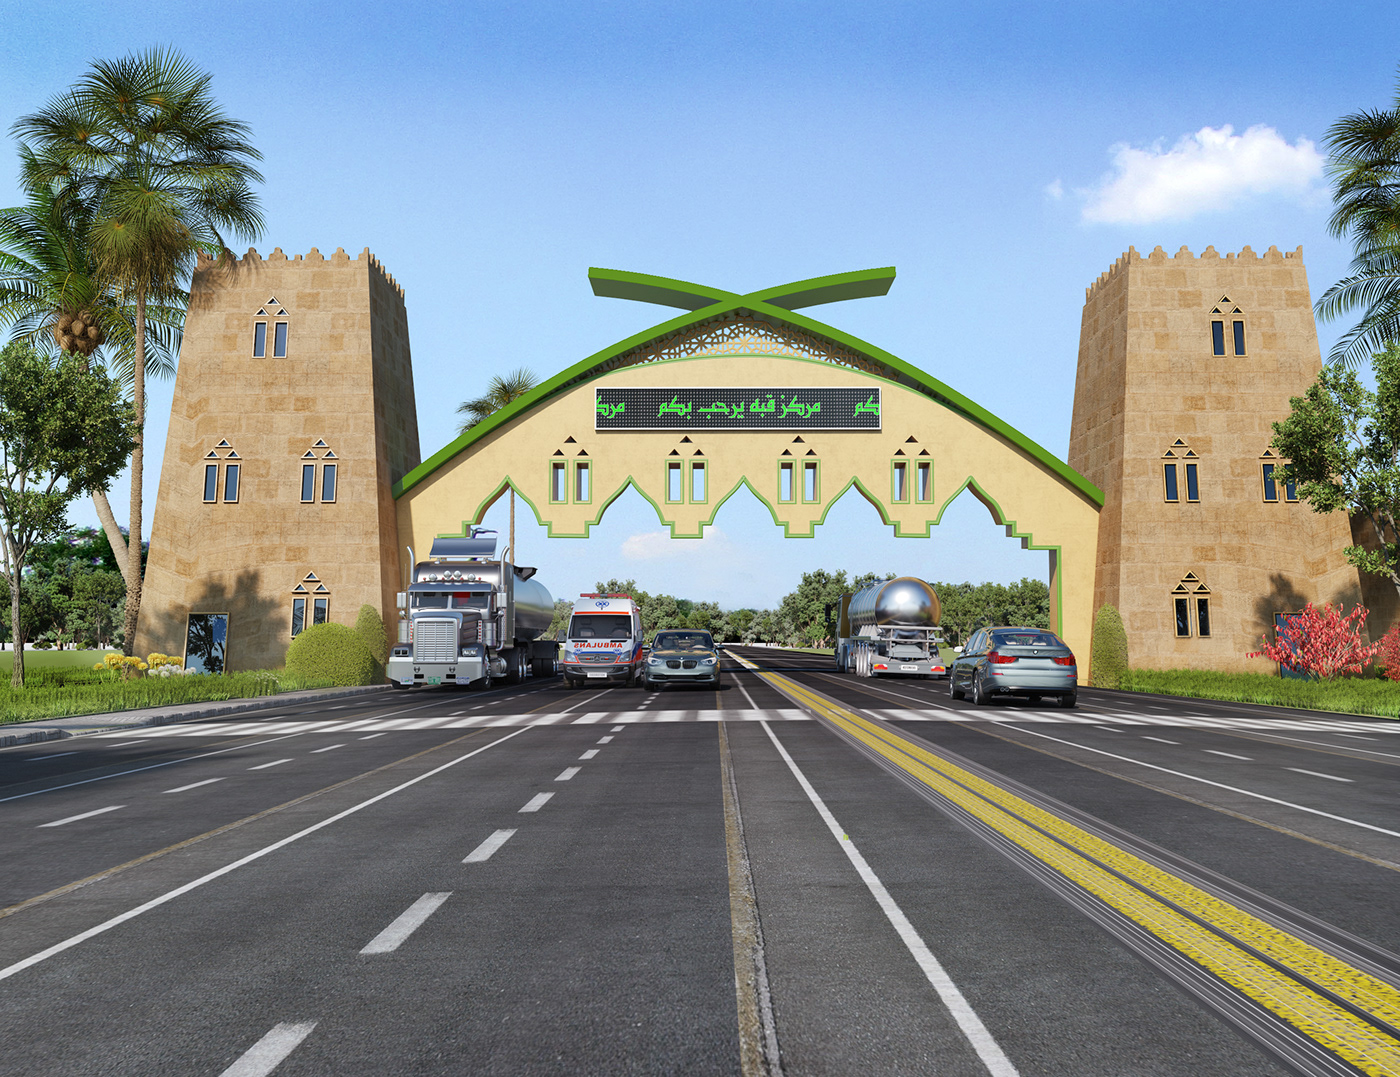 #gate  #entrance #securitygate #town #saudi #Islamic #archs #architecture #roads #highway